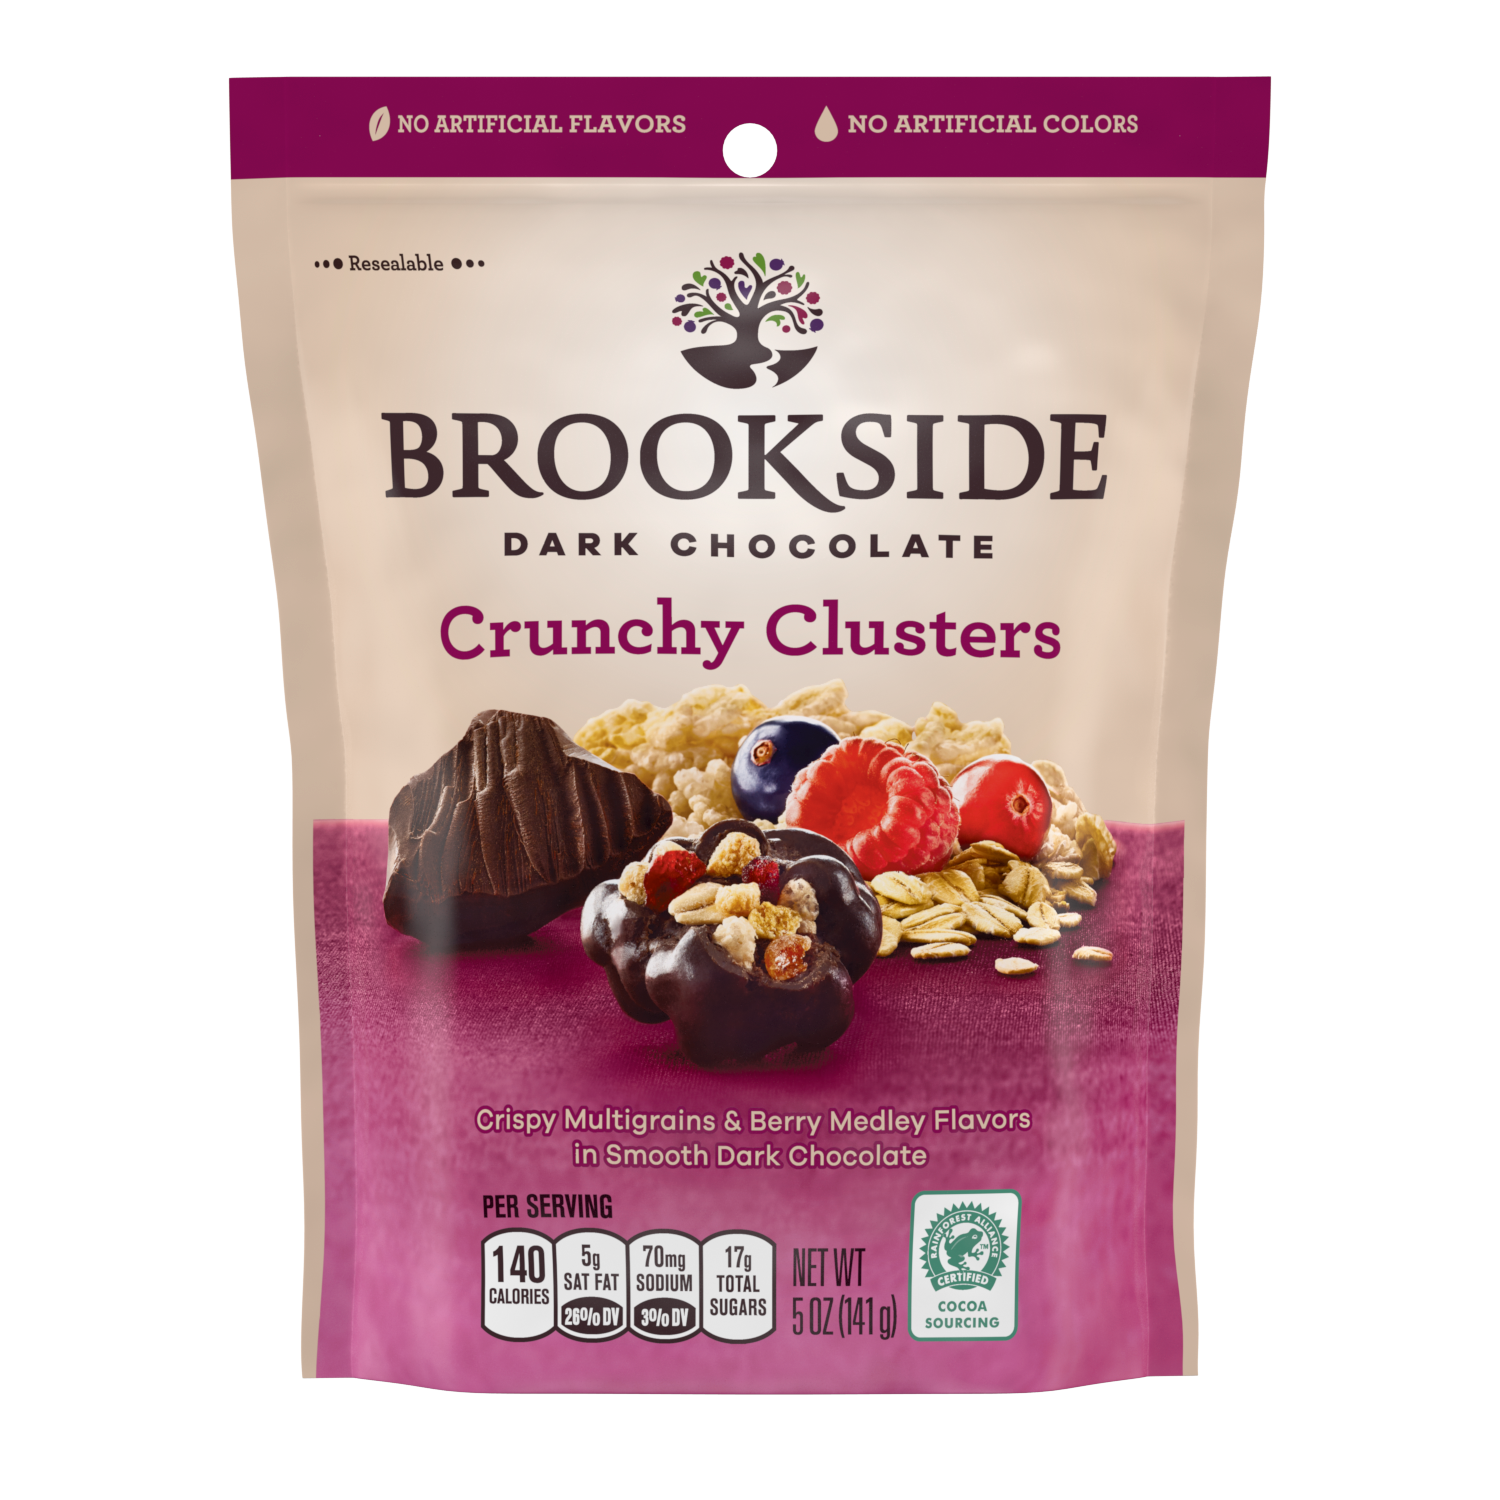 BROOKSIDE Crunchy Clusters Dark Chocolate Candy, 5 oz bag - Front of Package